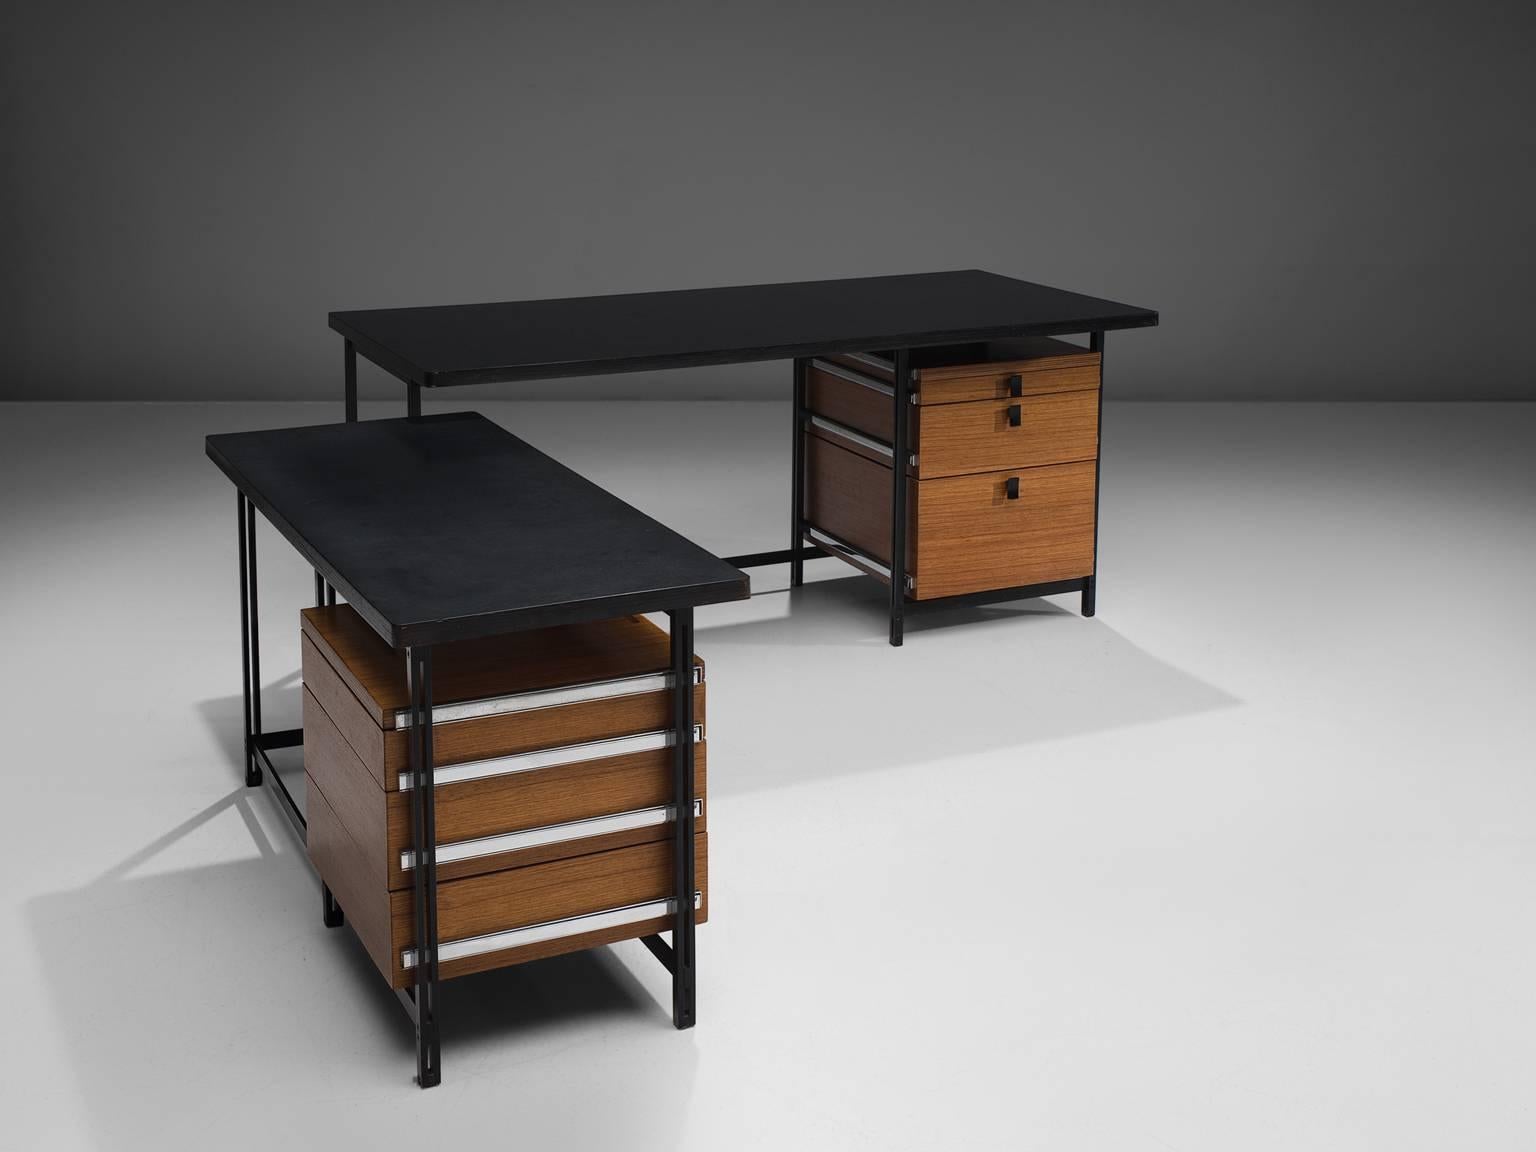 Jules Wabbes, writing desk with drawers, teak, black lacquered metal frame, chrome, Belgium, 1960s

A superb example of an early Belgium executive desk in teak from the 1960s designed by master designer Jules Wabbes. This desk is equipped with a